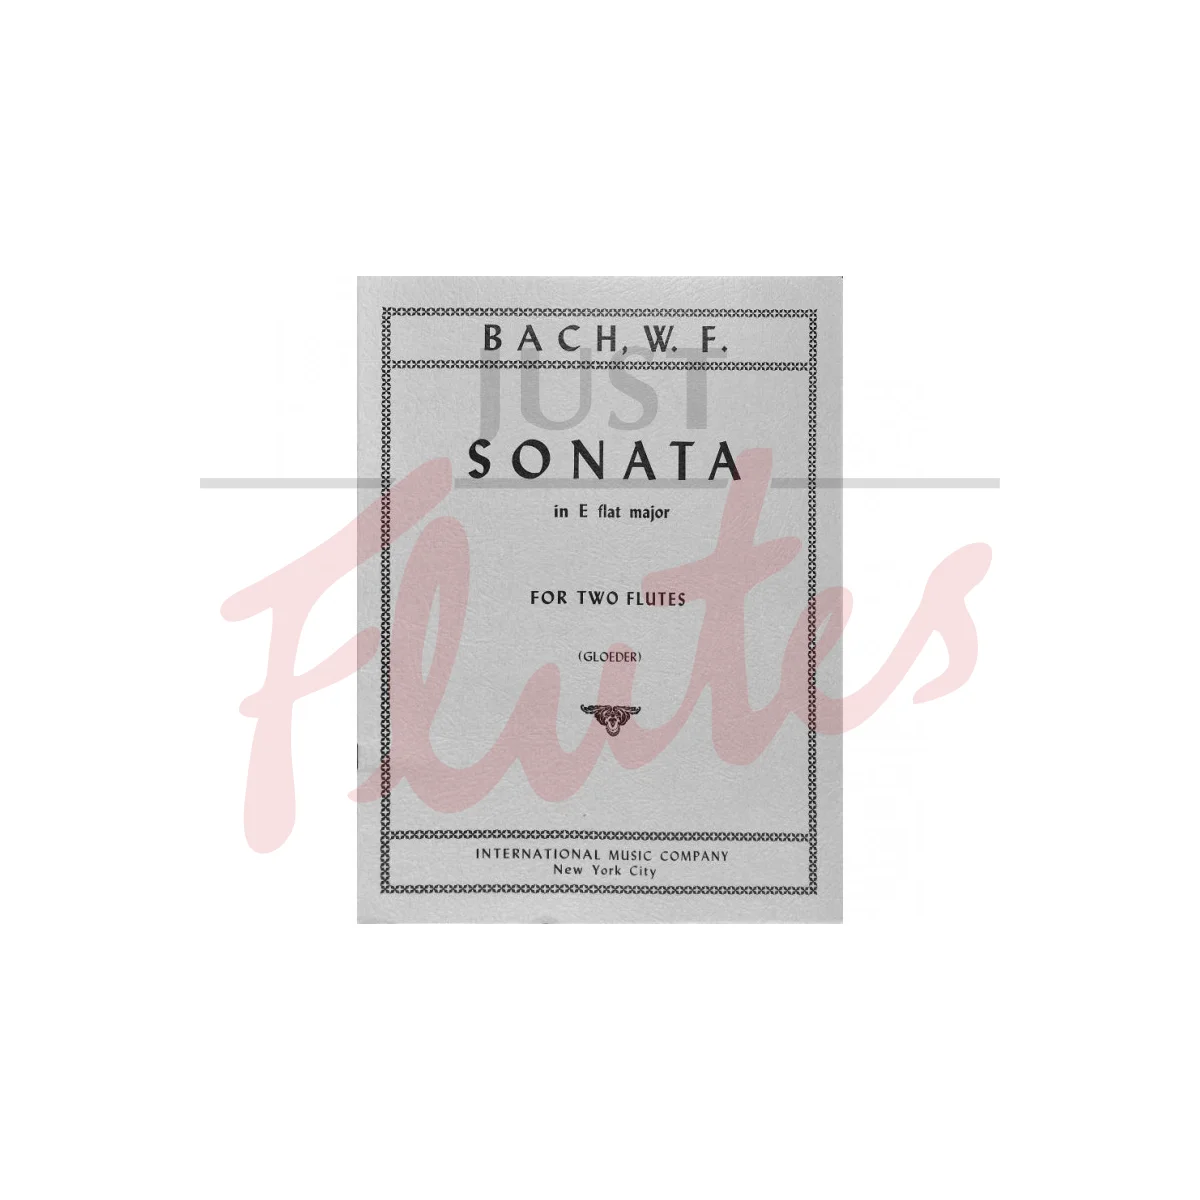 Sonata in E flat major for Two Flutes